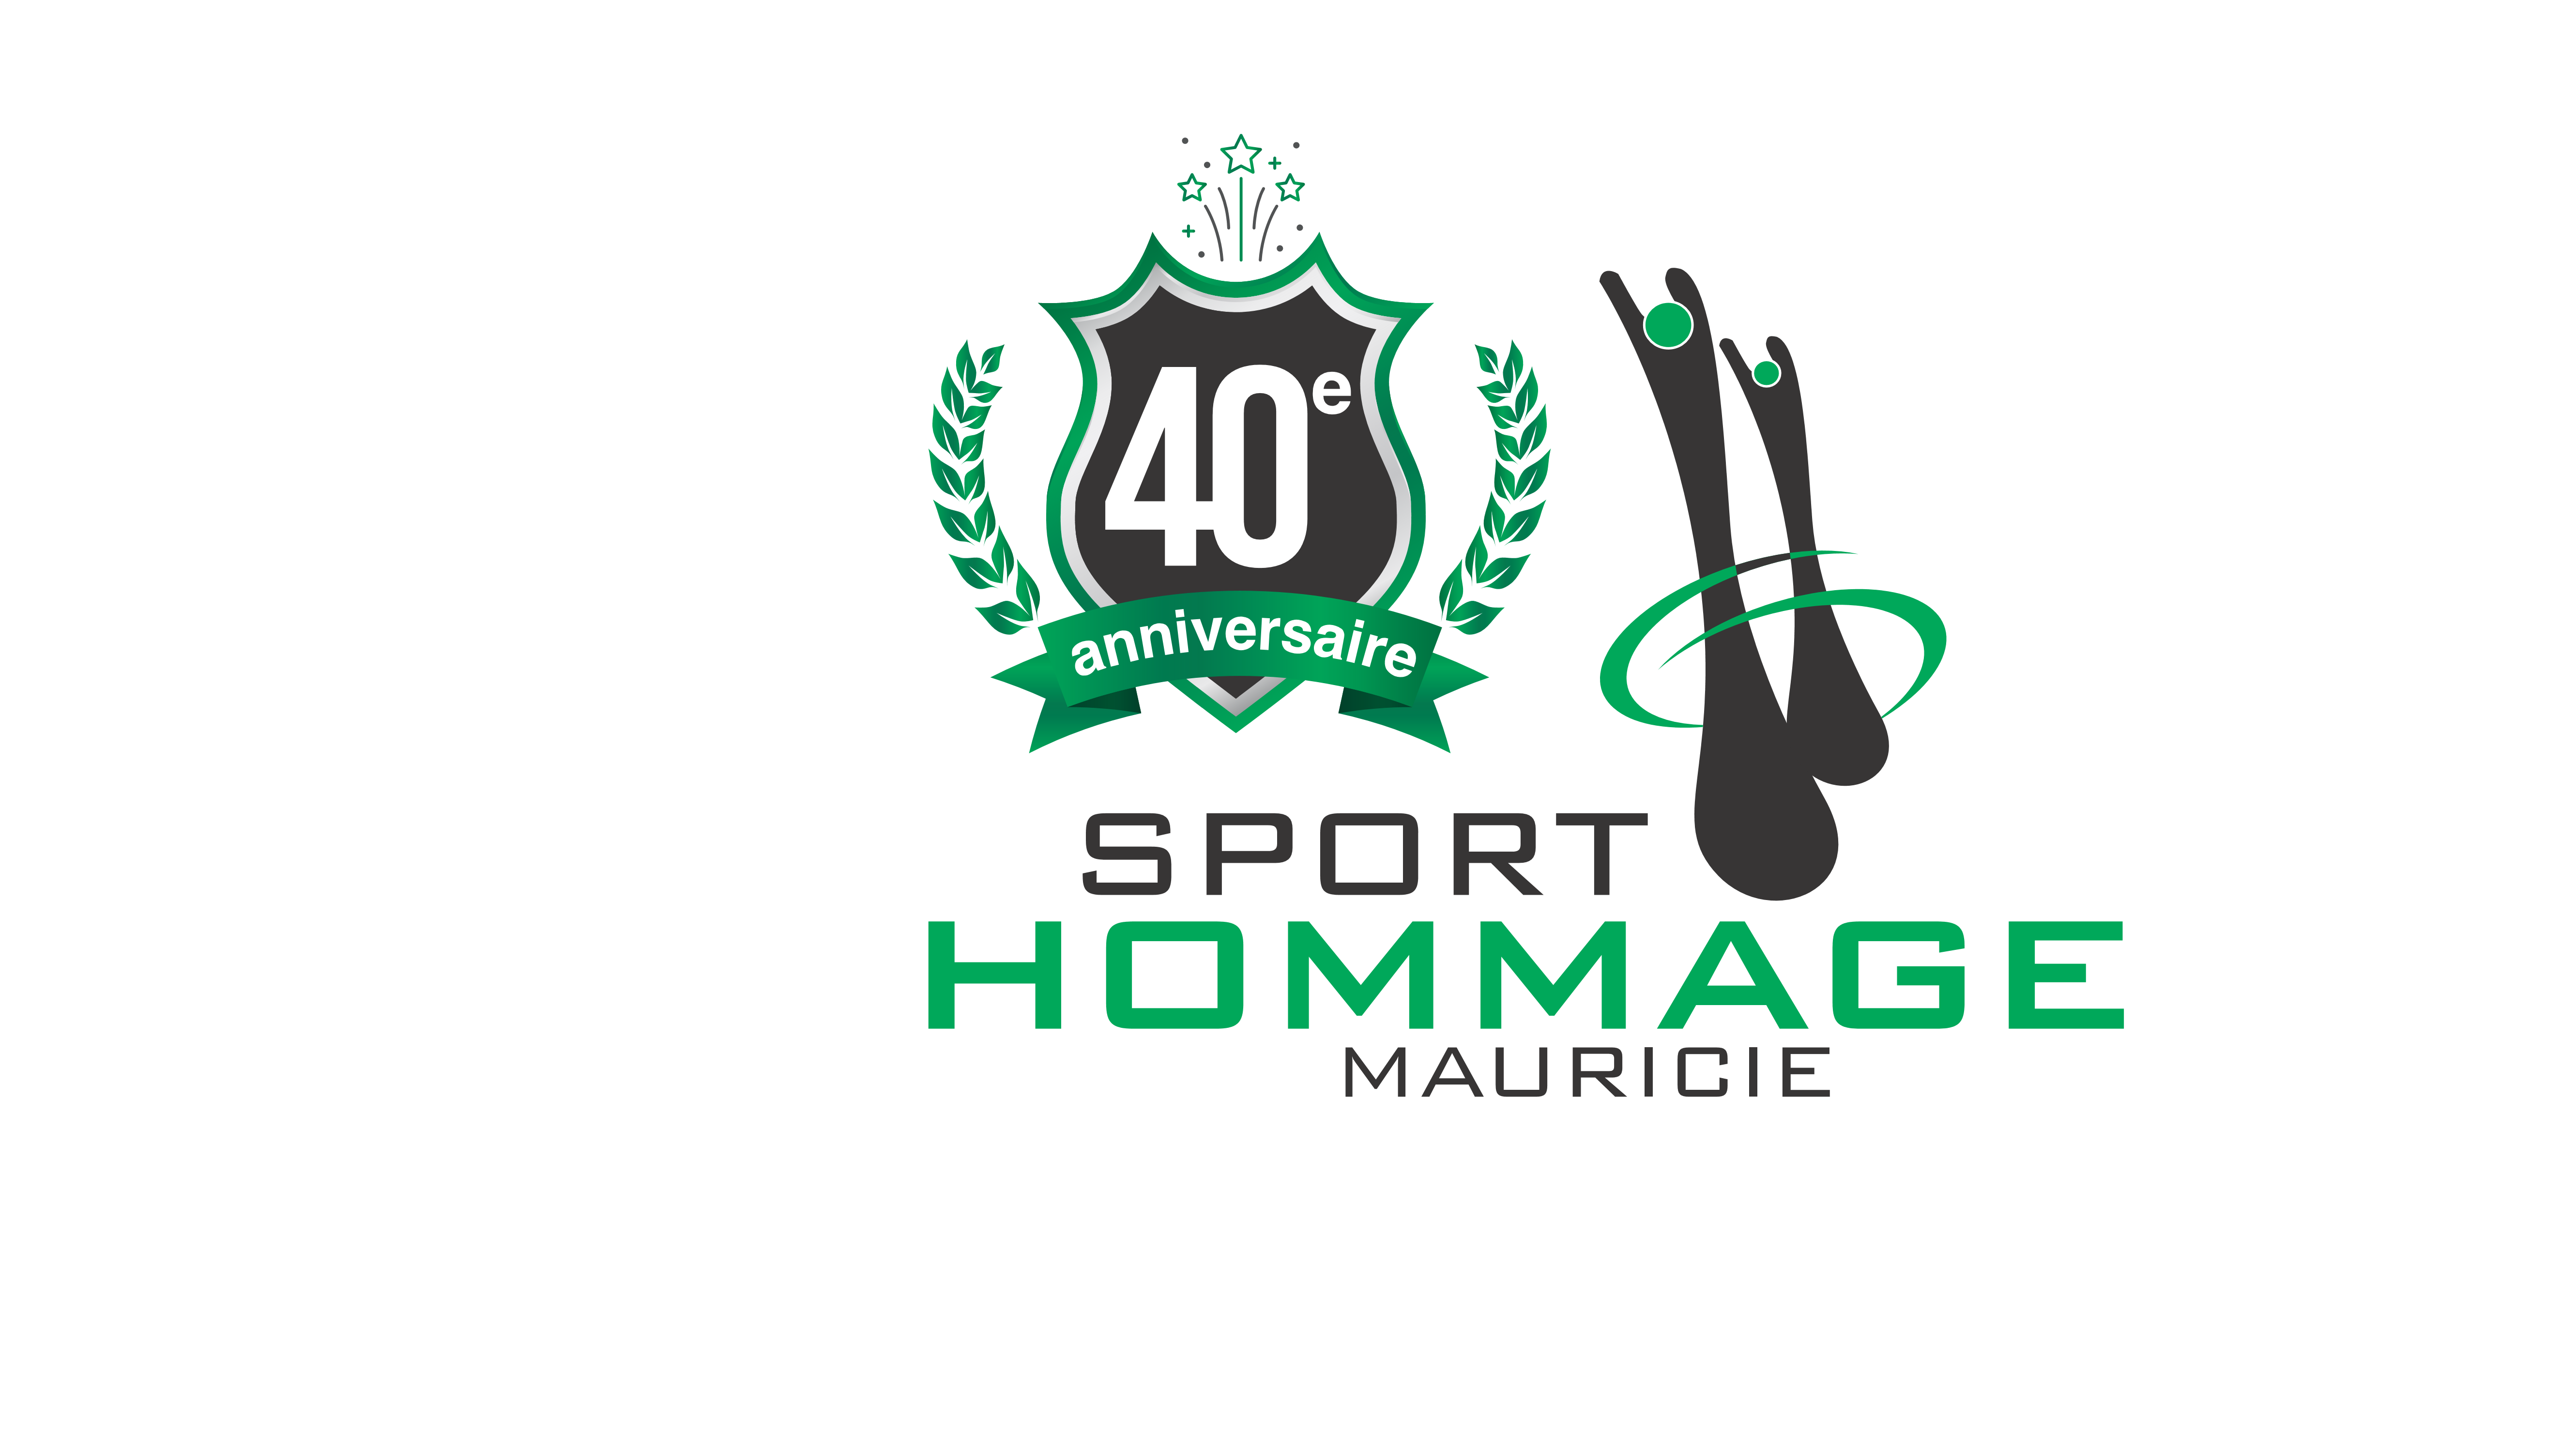 Corporation Sport-hommage Mauricie